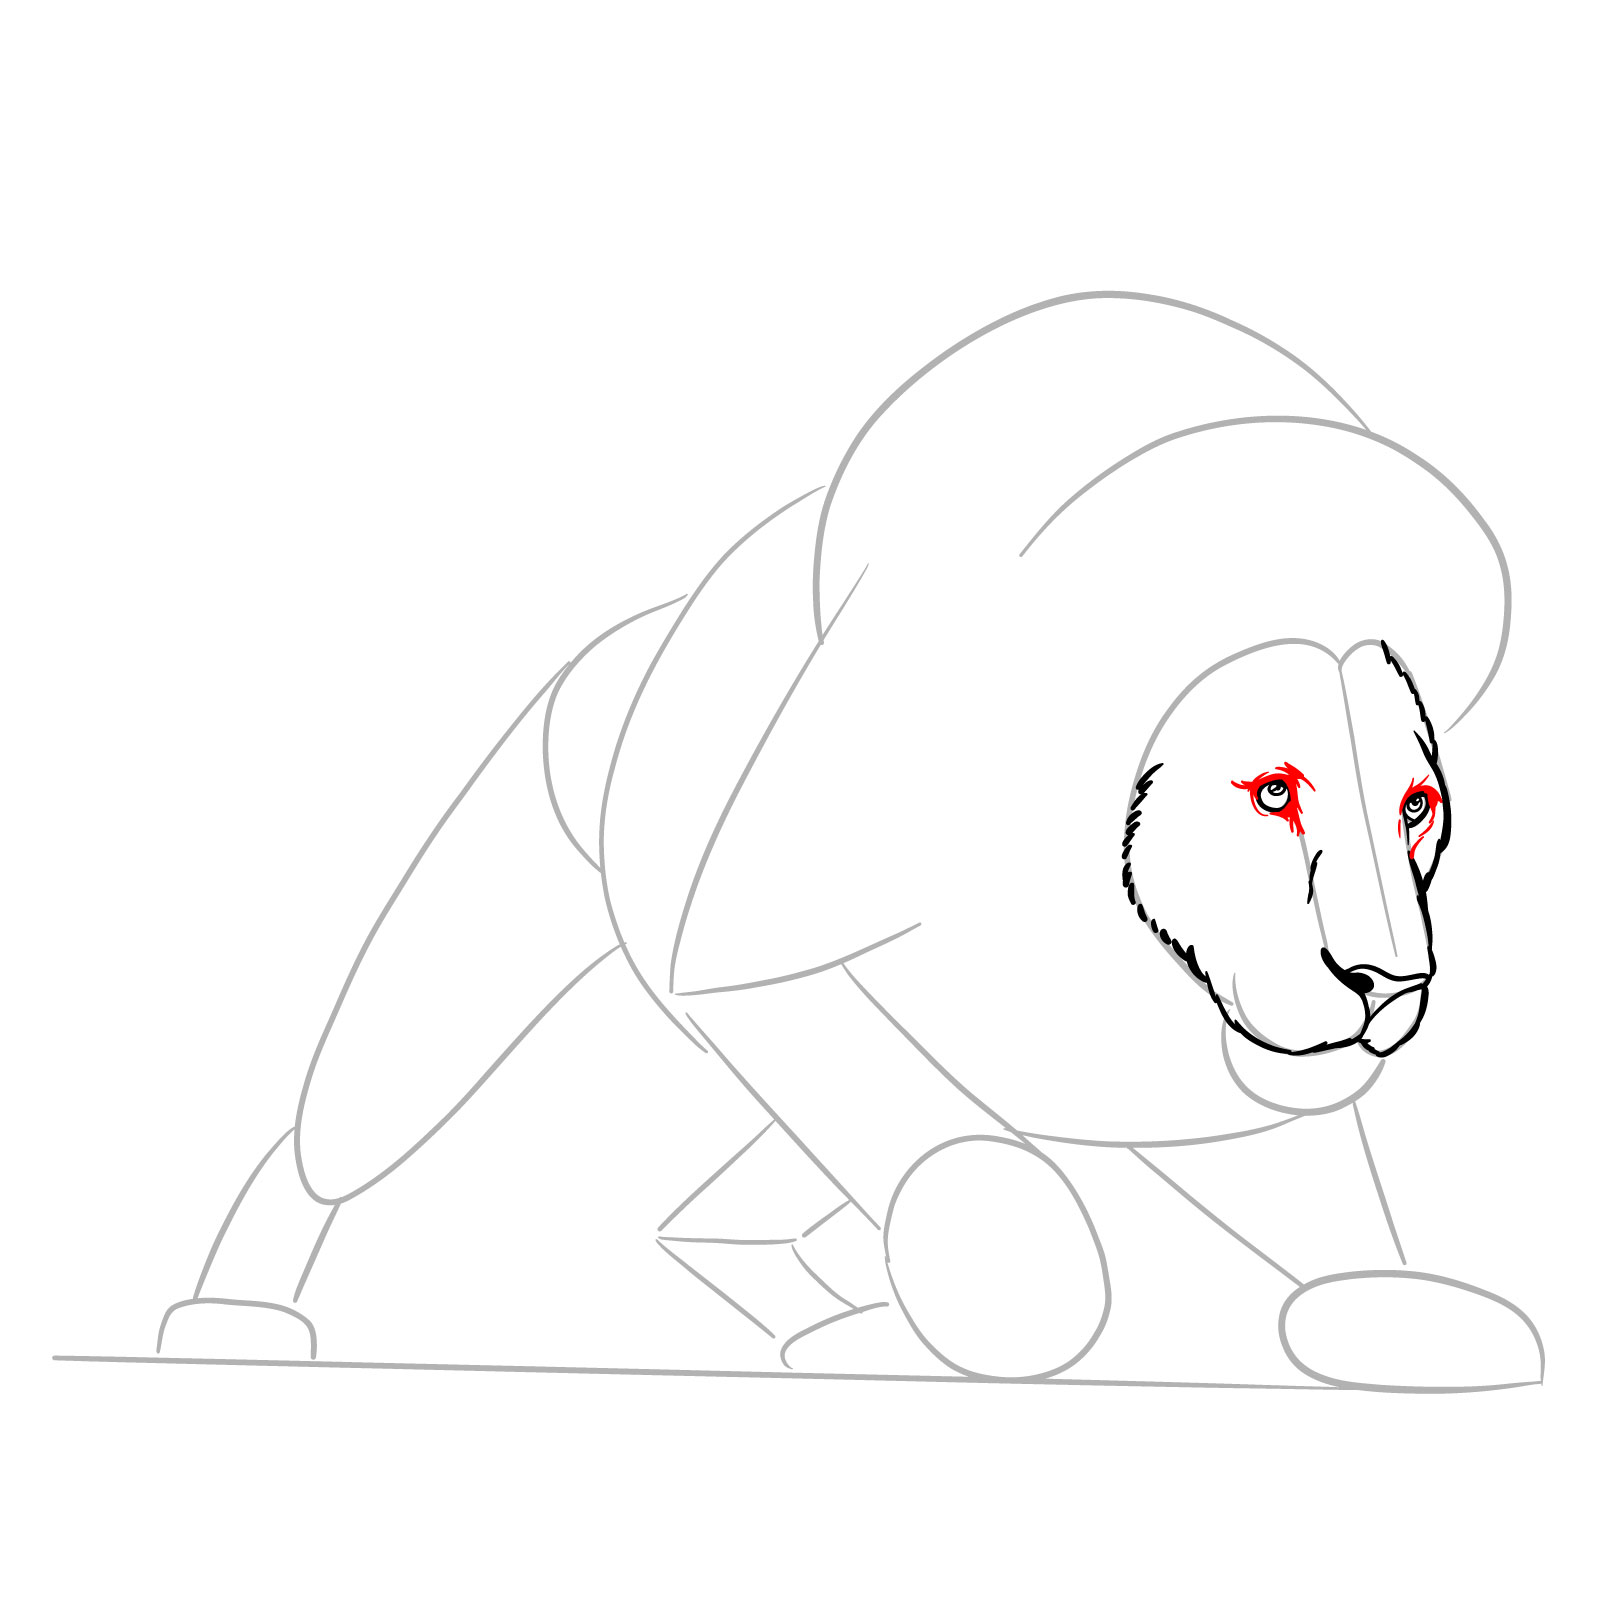 How to draw a hunting lion - Step 7: Enhancing the area around the eyes